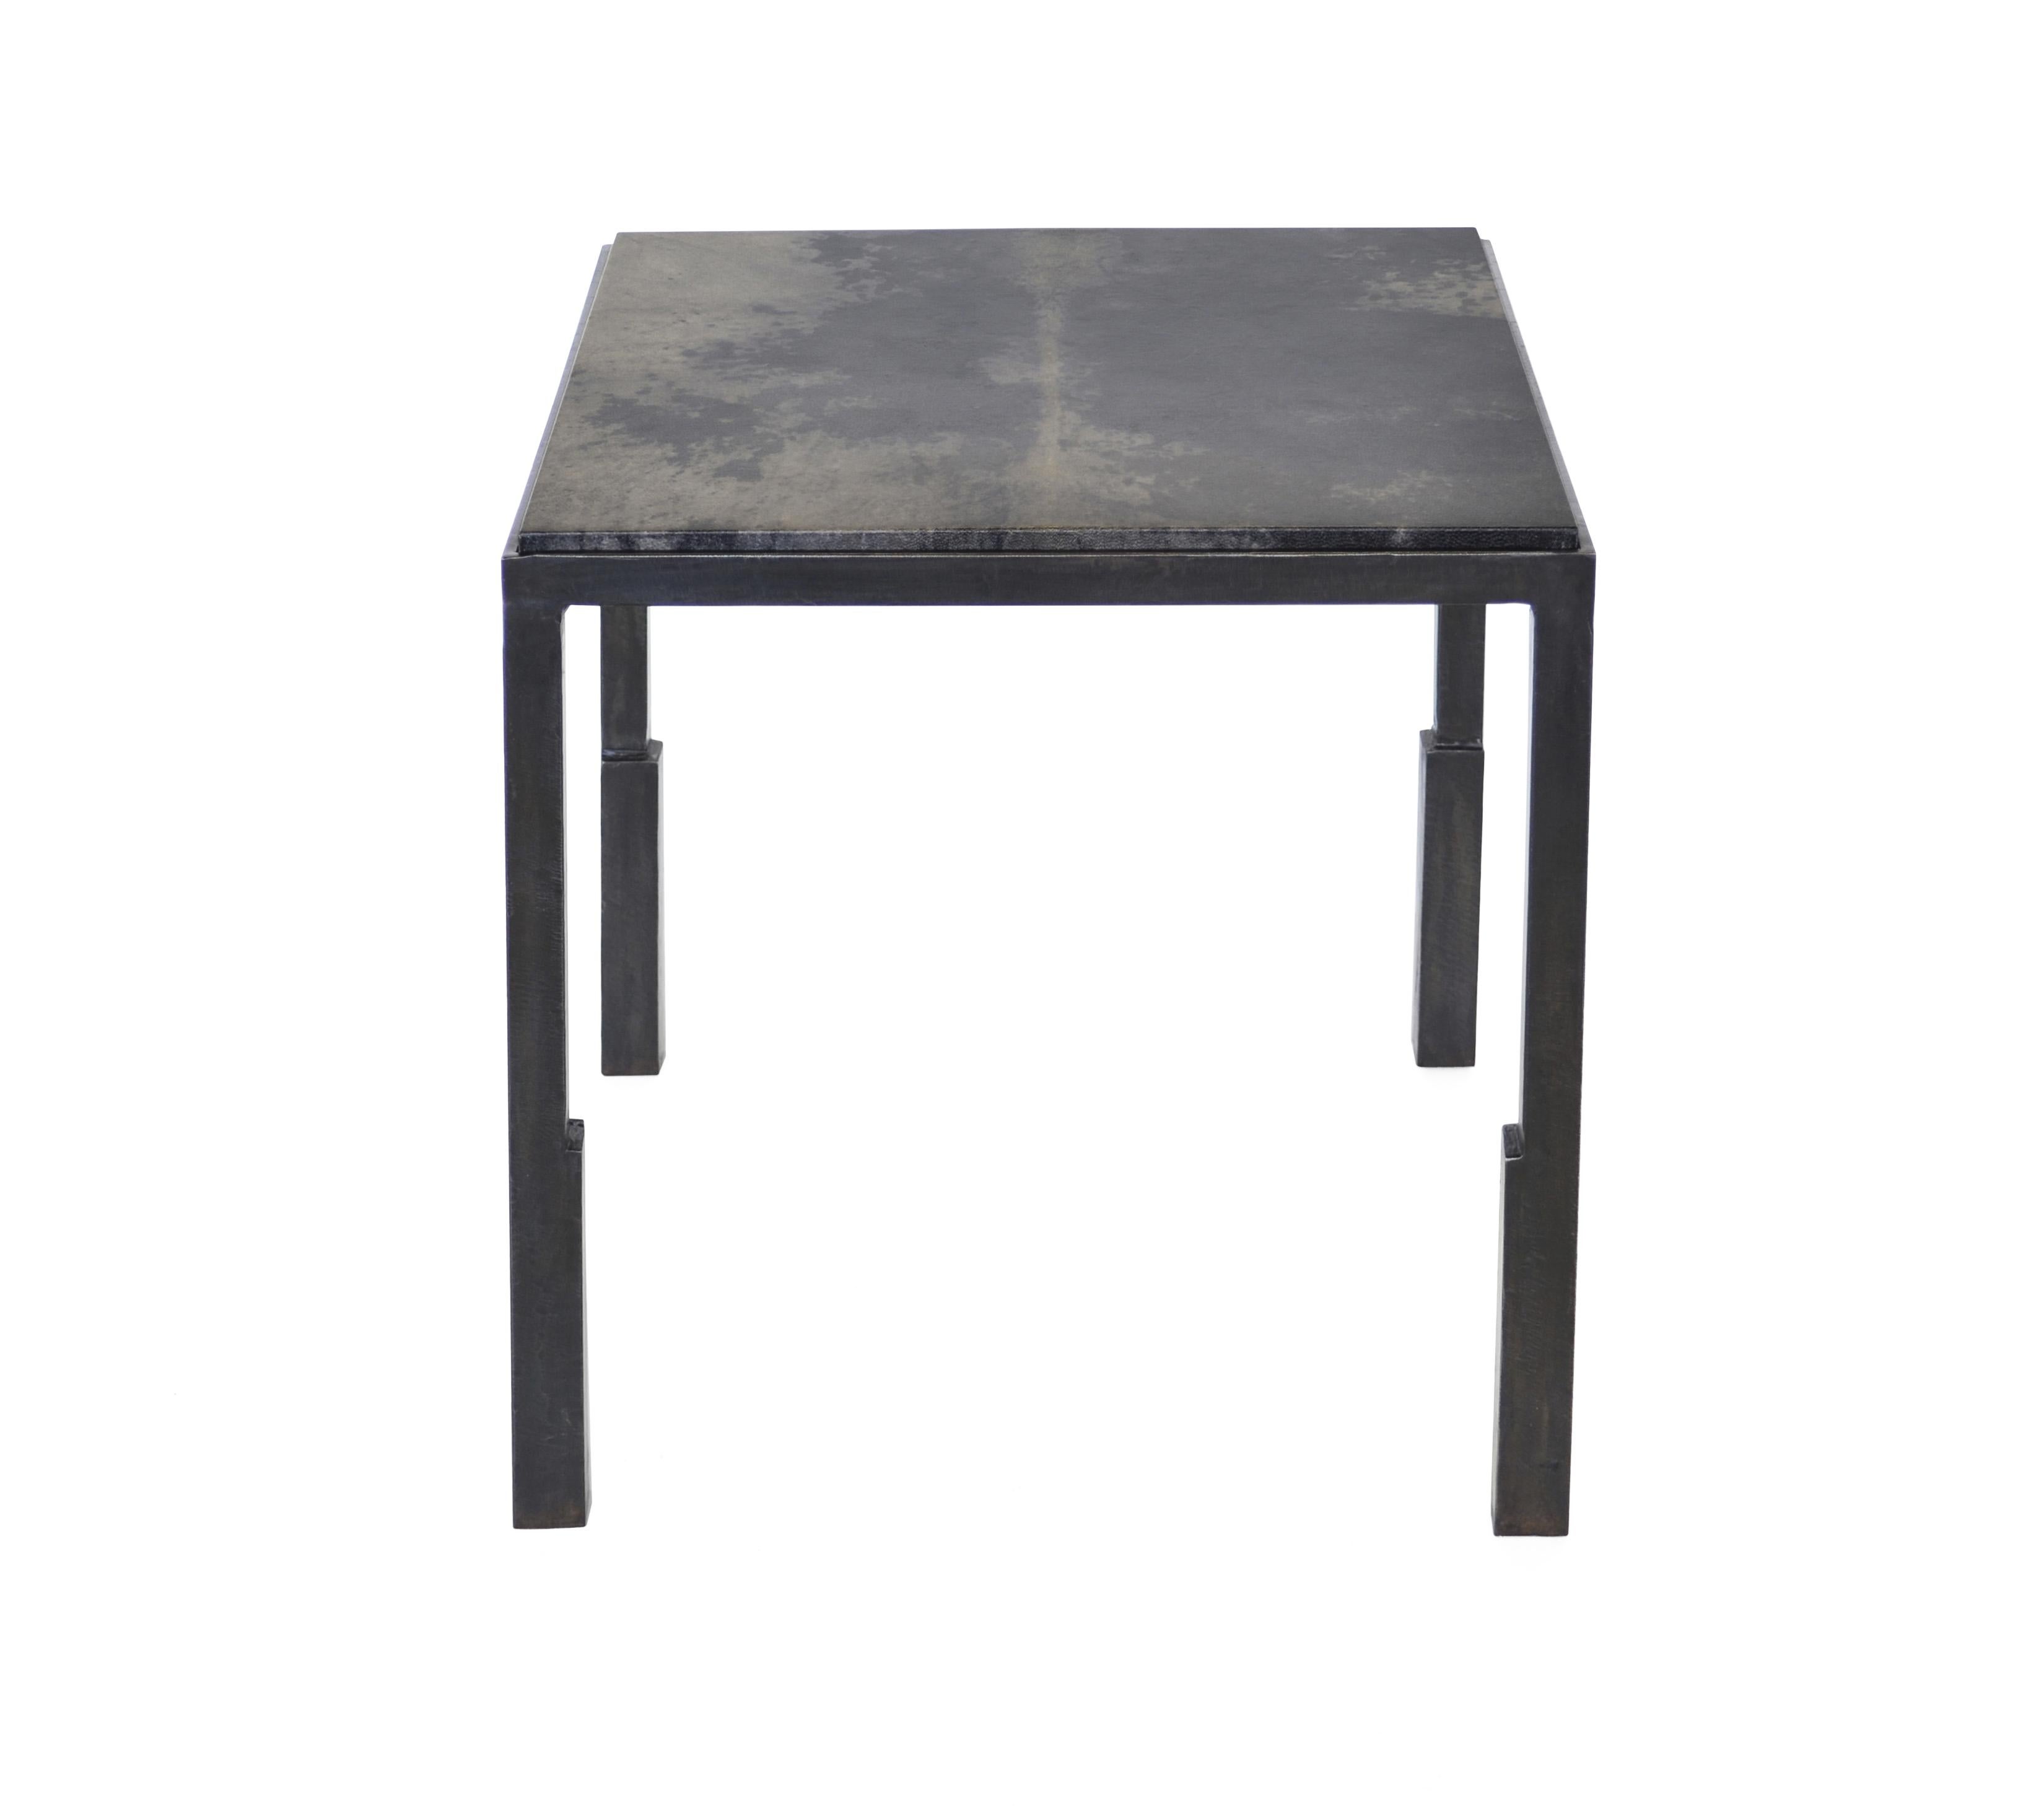 A blackened steel table frame is hand-sculpted into unique geometries. The table can be customized by choosing a shagreen or parchment tabletop.

Blackened steel with wax finish and shagreen or parchment top.

Handmade in New York.
 